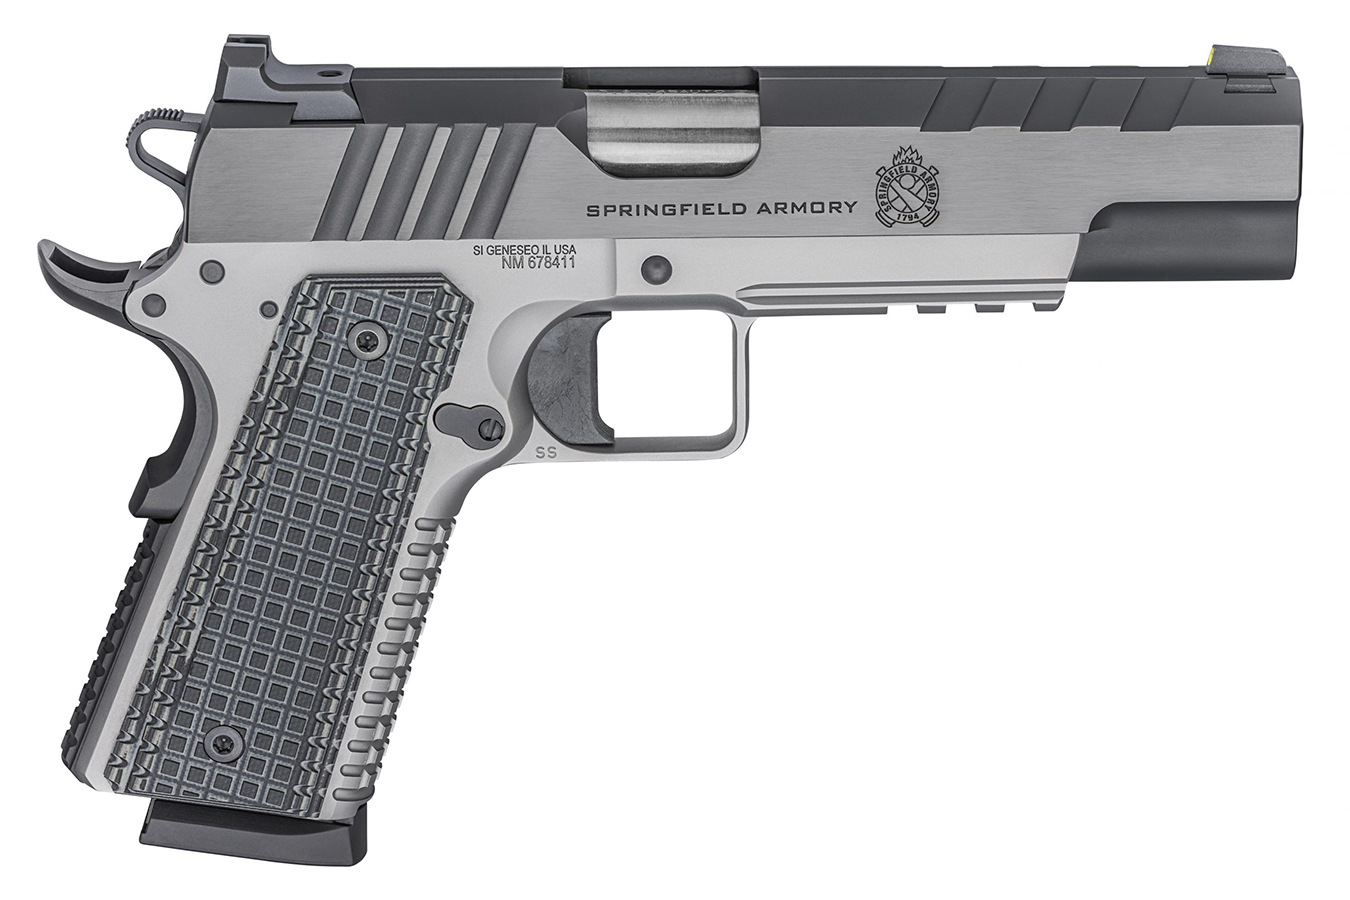 1911 EMISSARY 45 ACP FULL-SIZE PISTOL WITH VZ G10 GRIPS